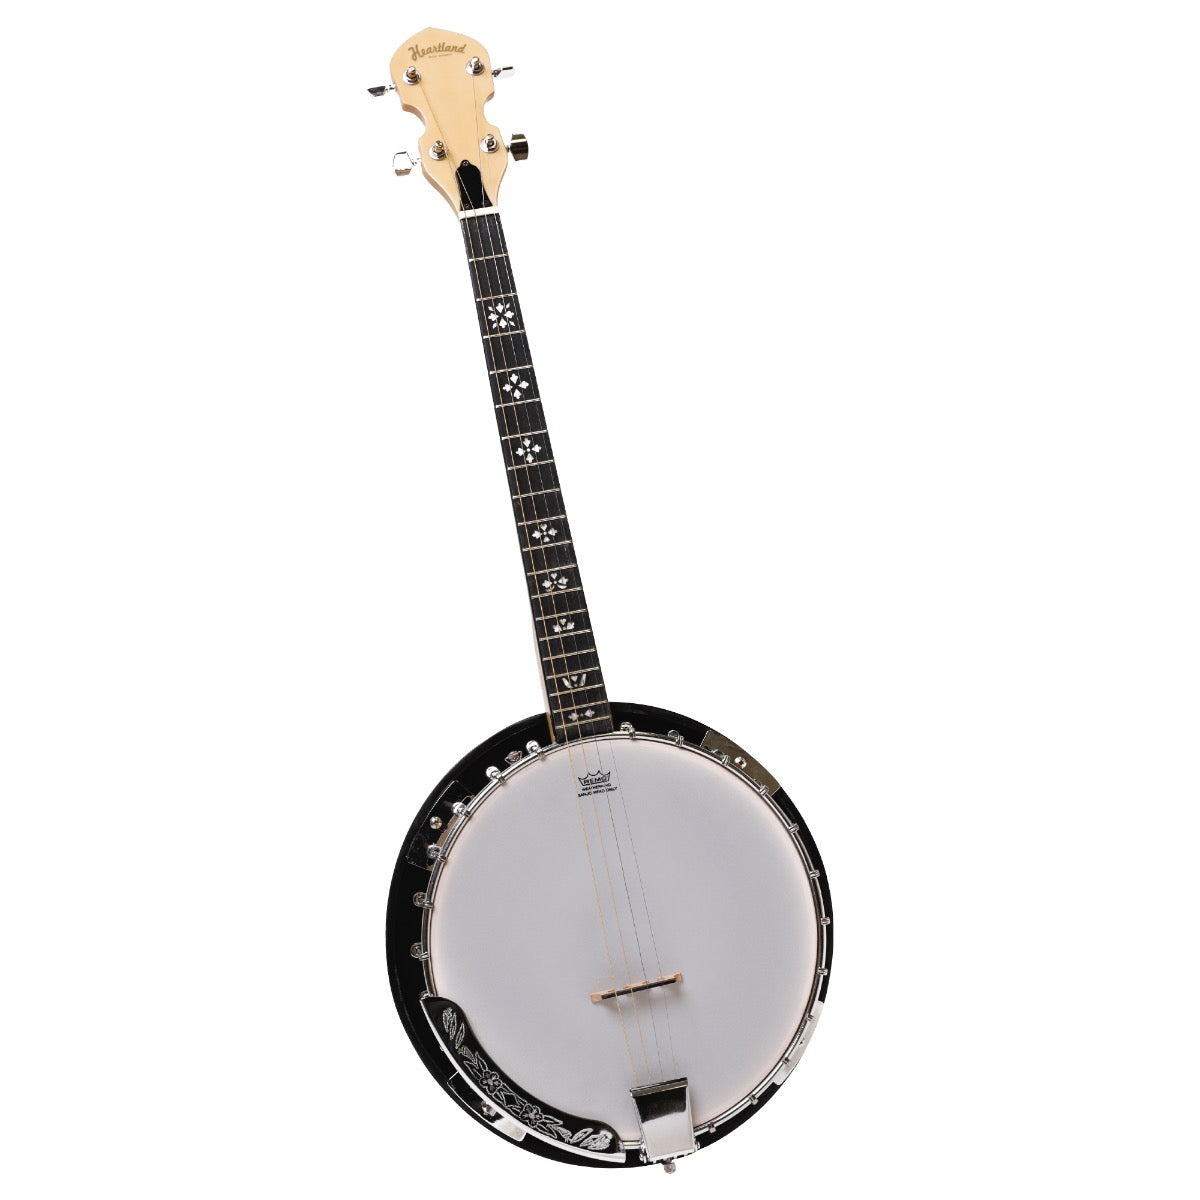 HEARTLAND DELUXE IRISH TENOR BANJO 19 FRETS WITH 24 BRACKET AND CLOSED SOLID BACK MAPLE FINISH